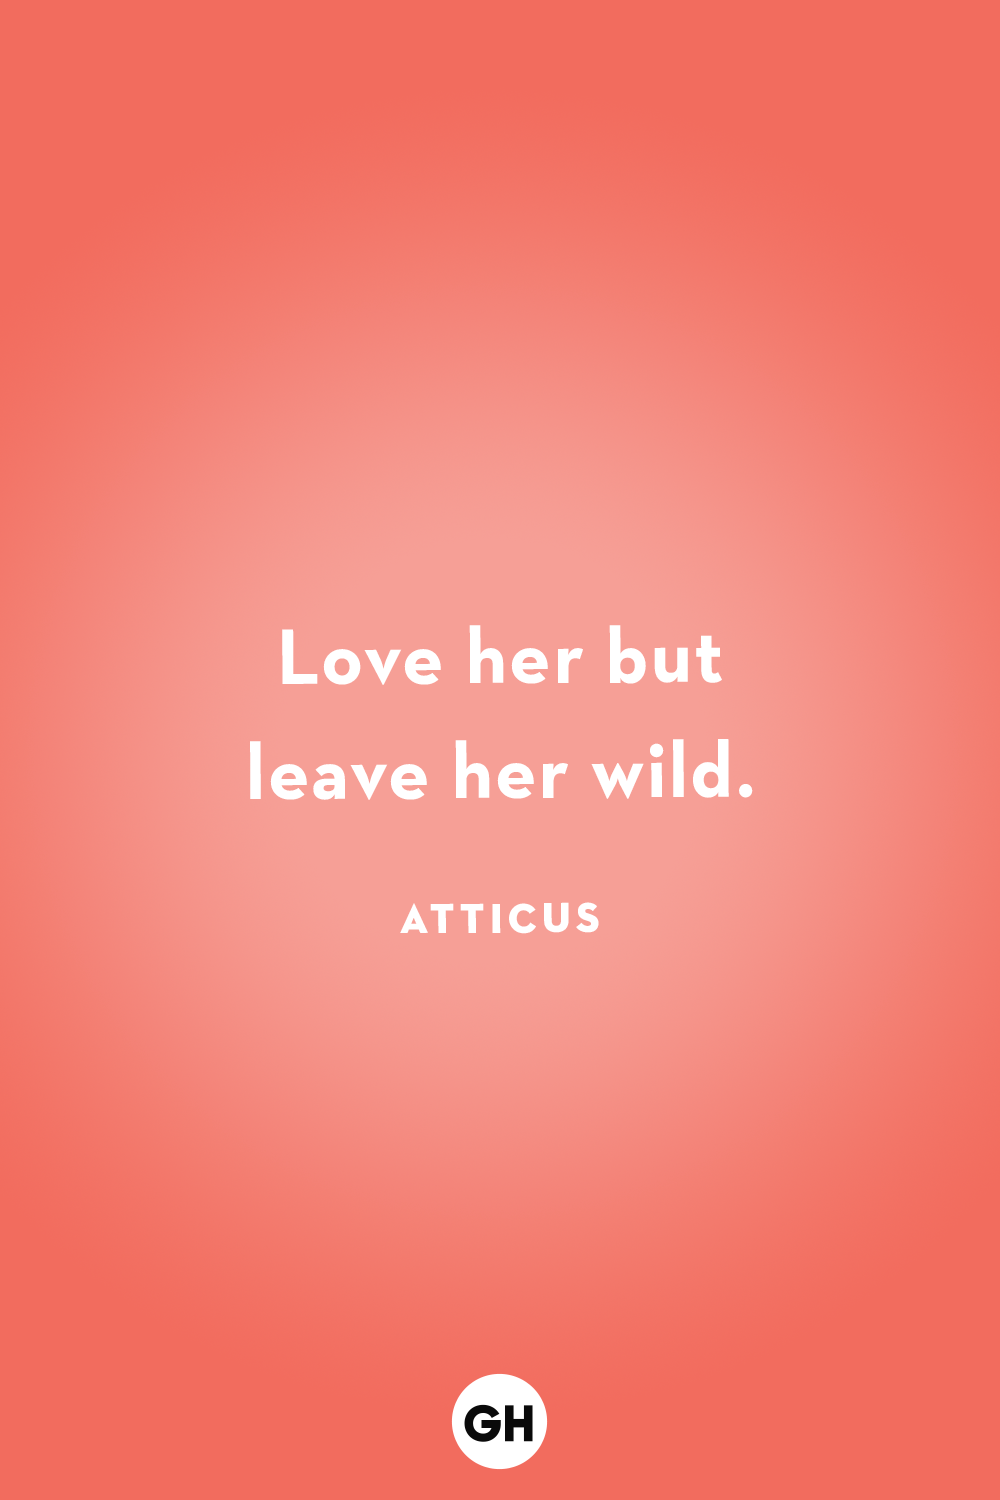 https://hips.hearstapps.com/hmg-prod/images/love-quotes-atticus-6568cce1ca8b5.png